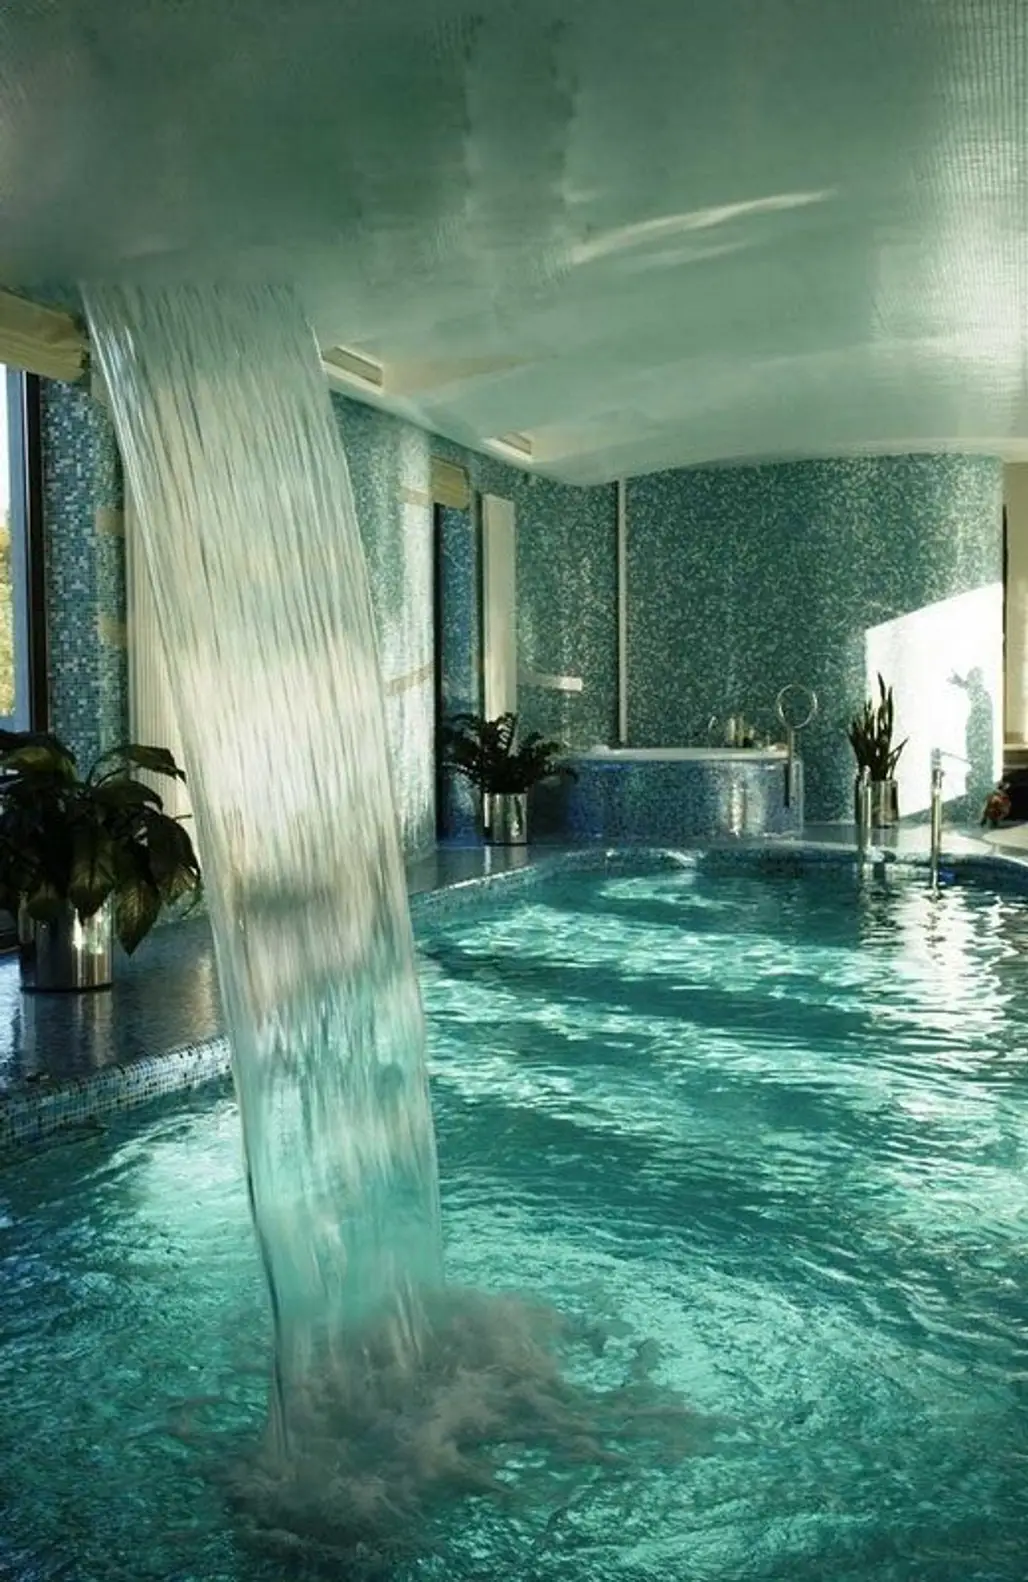 Private Pool in the Bathroom